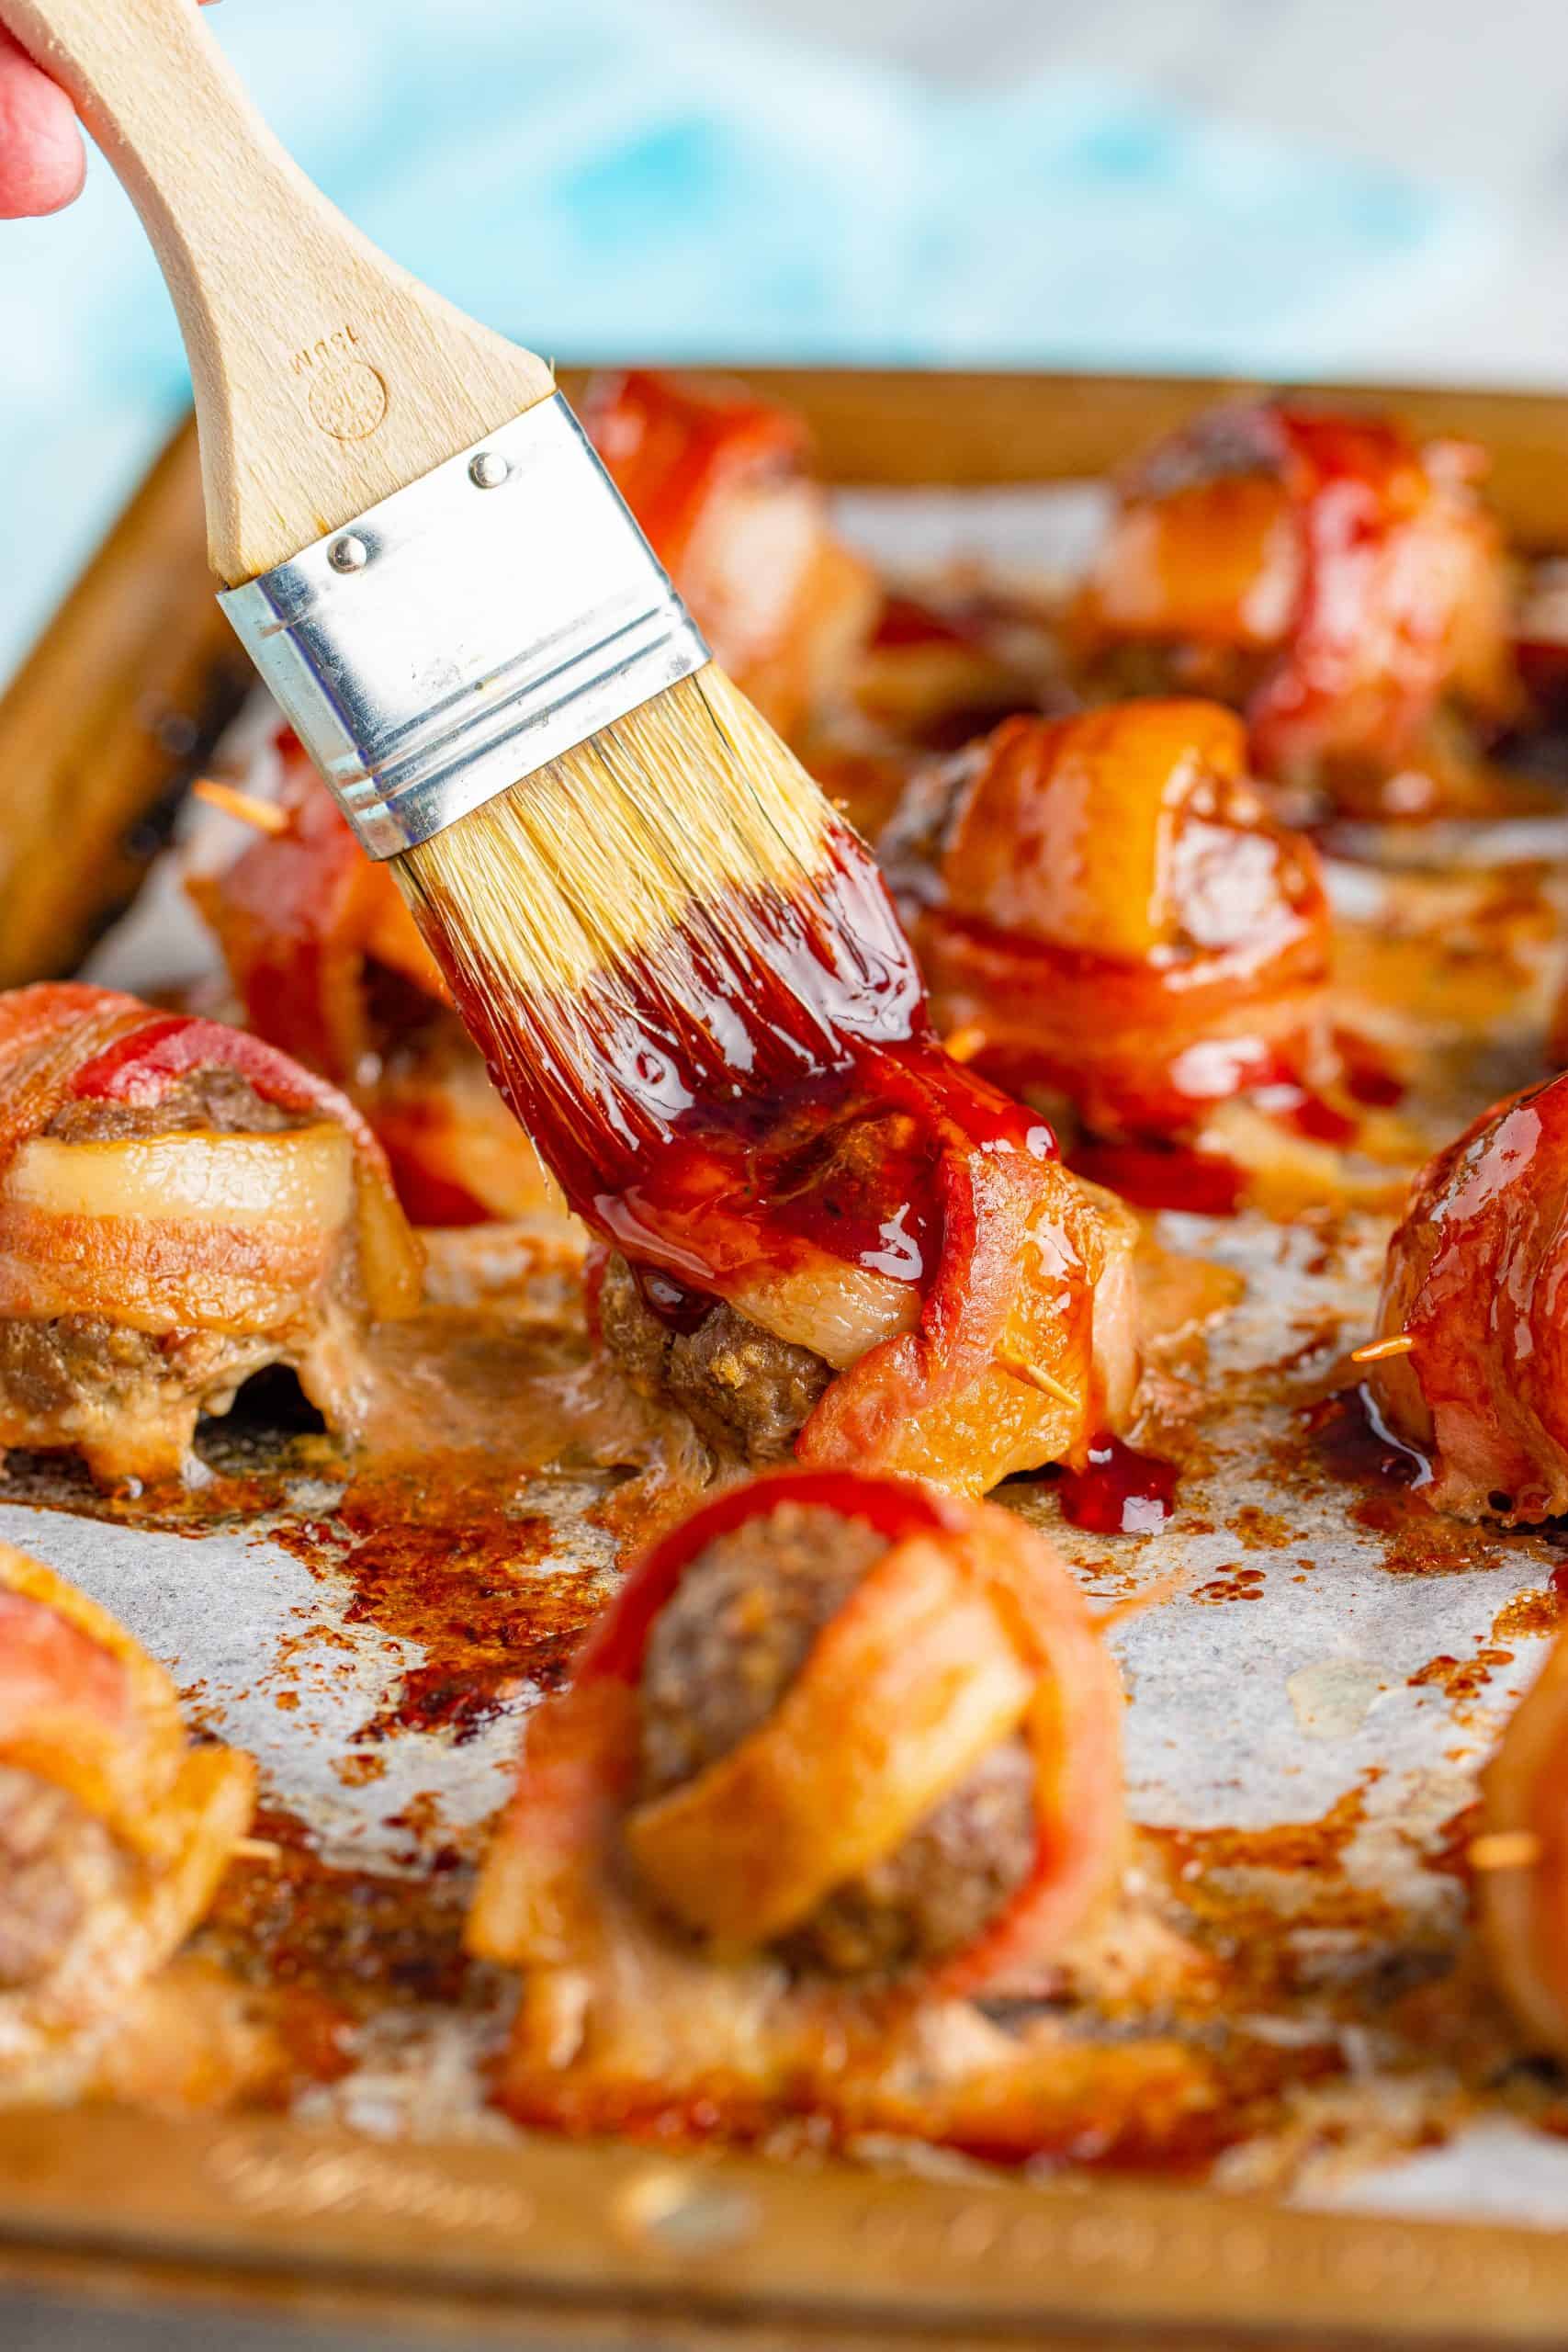 BBQ sauce mixture being brushed on bacon wrapped meatballs.